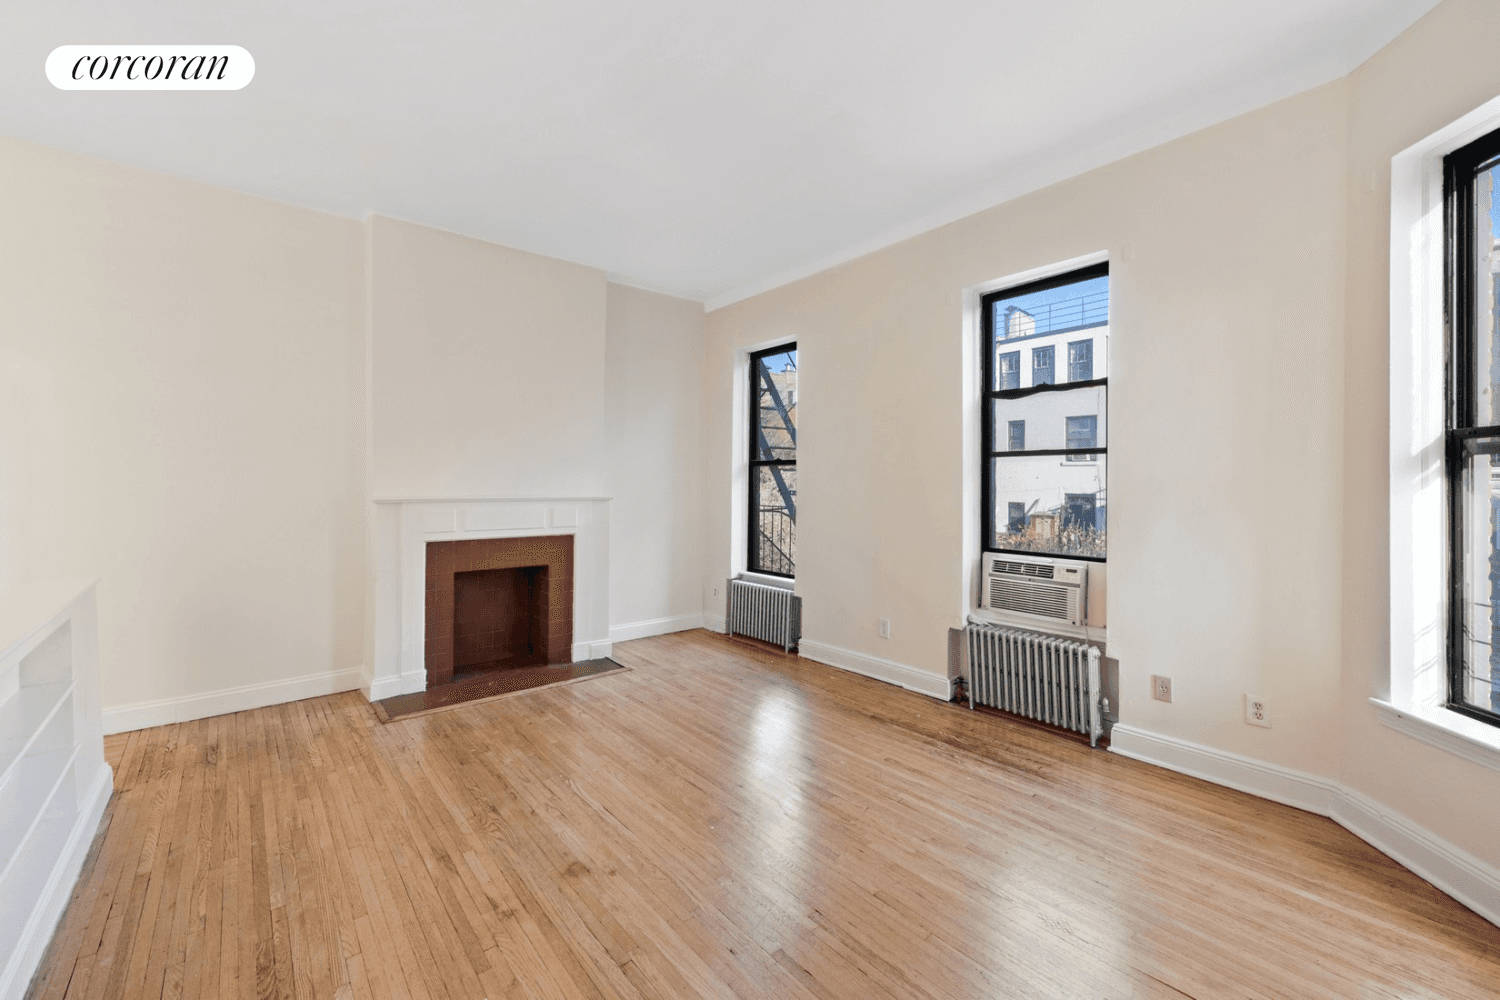 Come see this very spacious, light filled one bedroom situated on the third floor elevator building of this picturesque co op on one of the most elegant tree lined streets ...